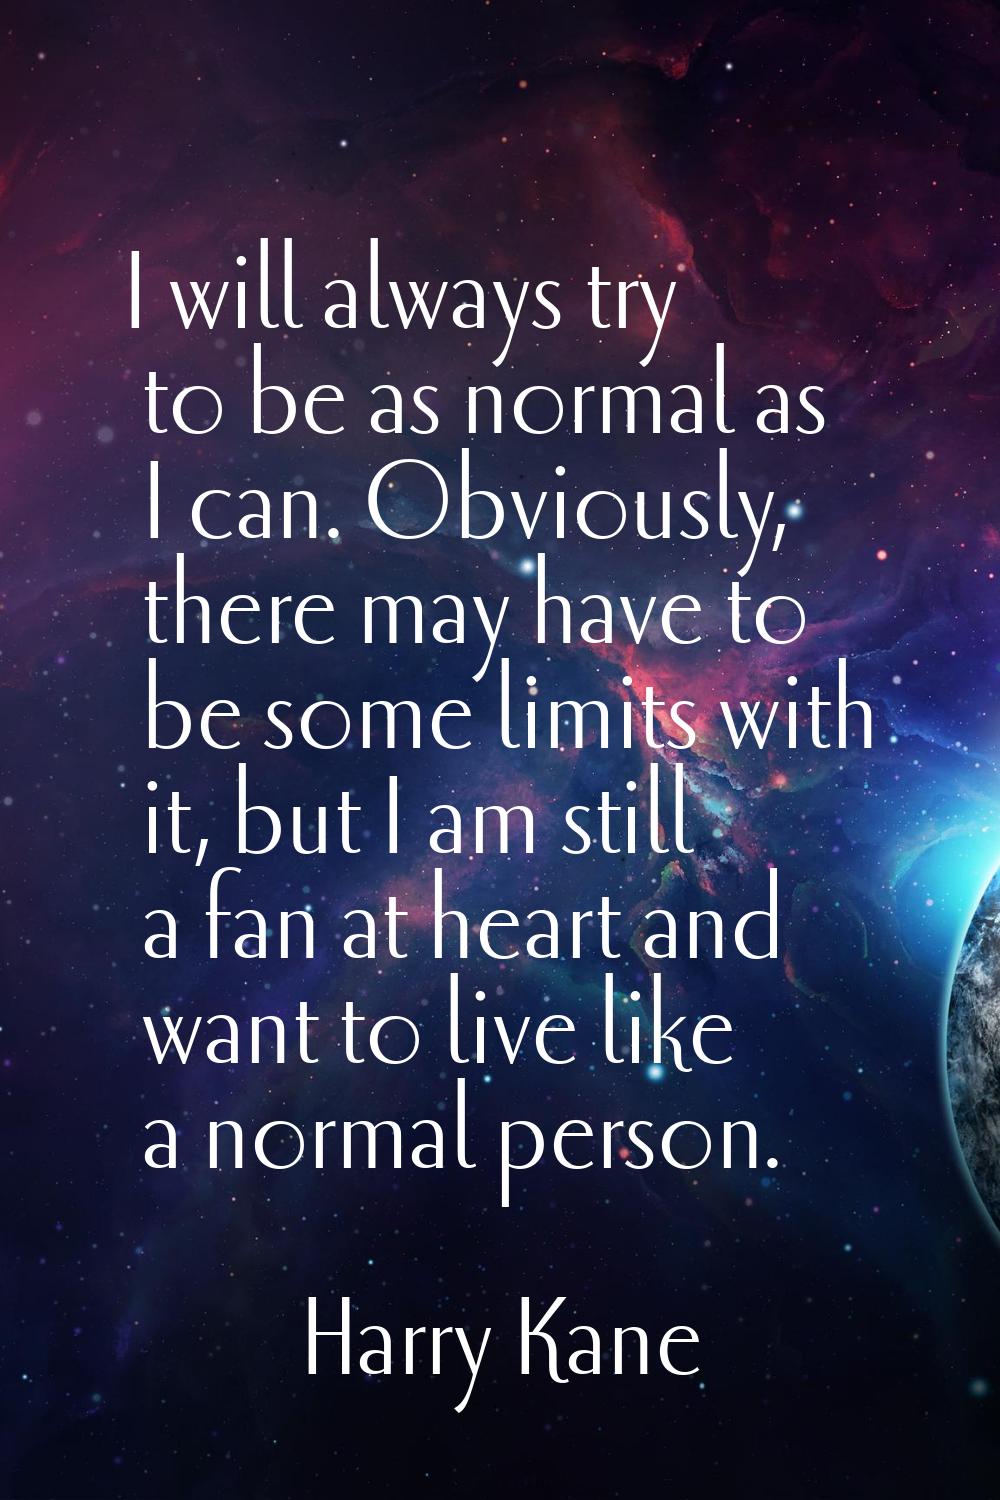 I will always try to be as normal as I can. Obviously, there may have to be some limits with it, bu